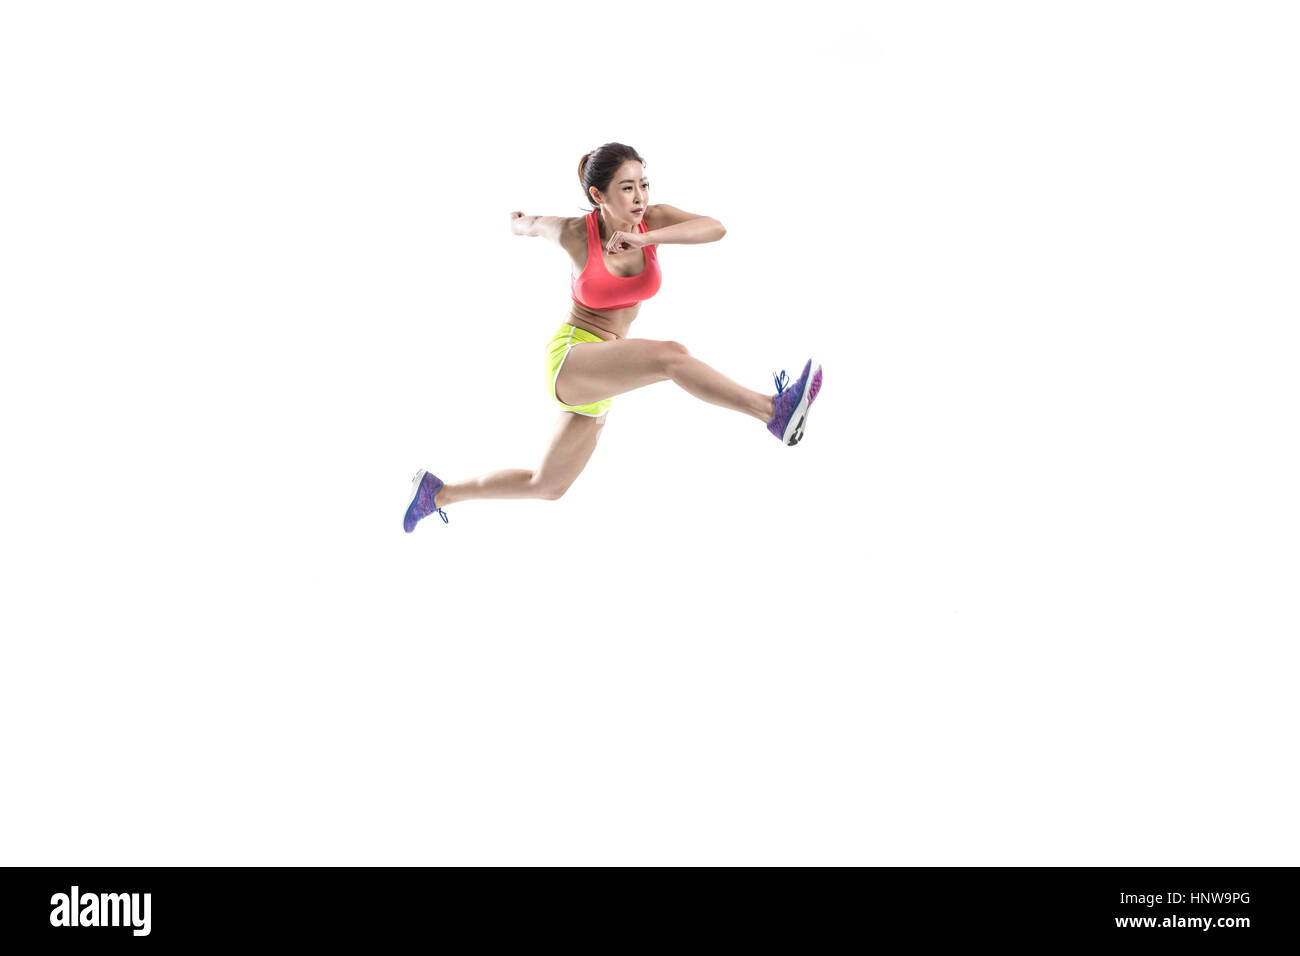 Side view of female athlete jumping Stock Photo